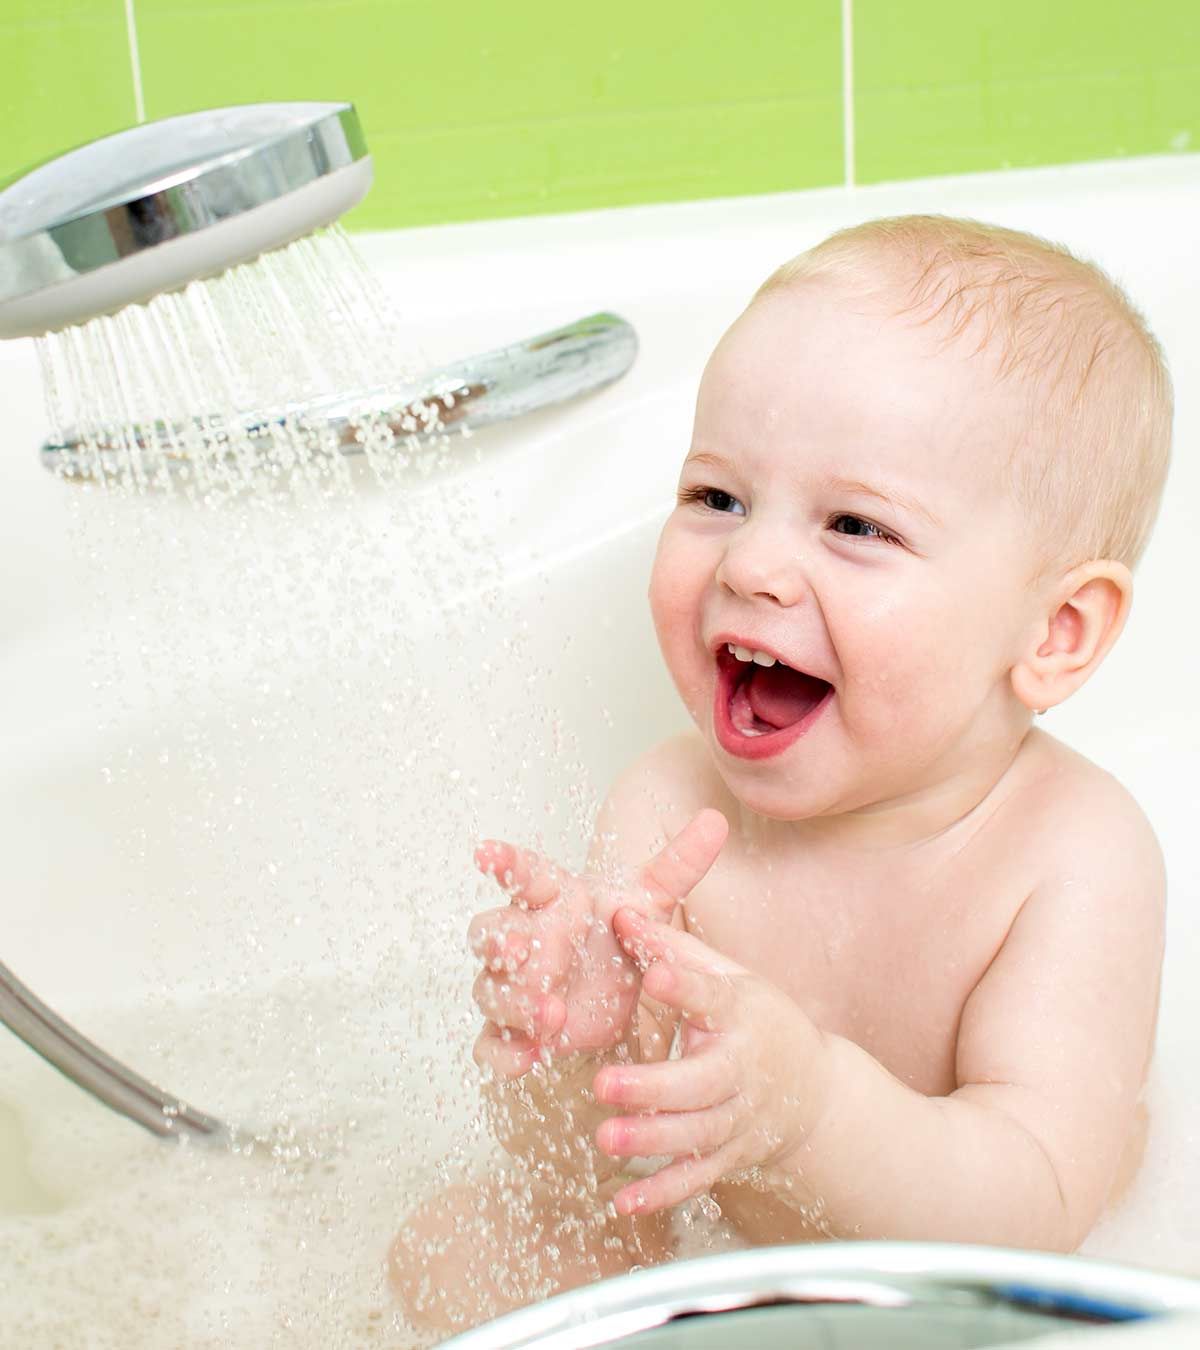 How To Bathe A Baby